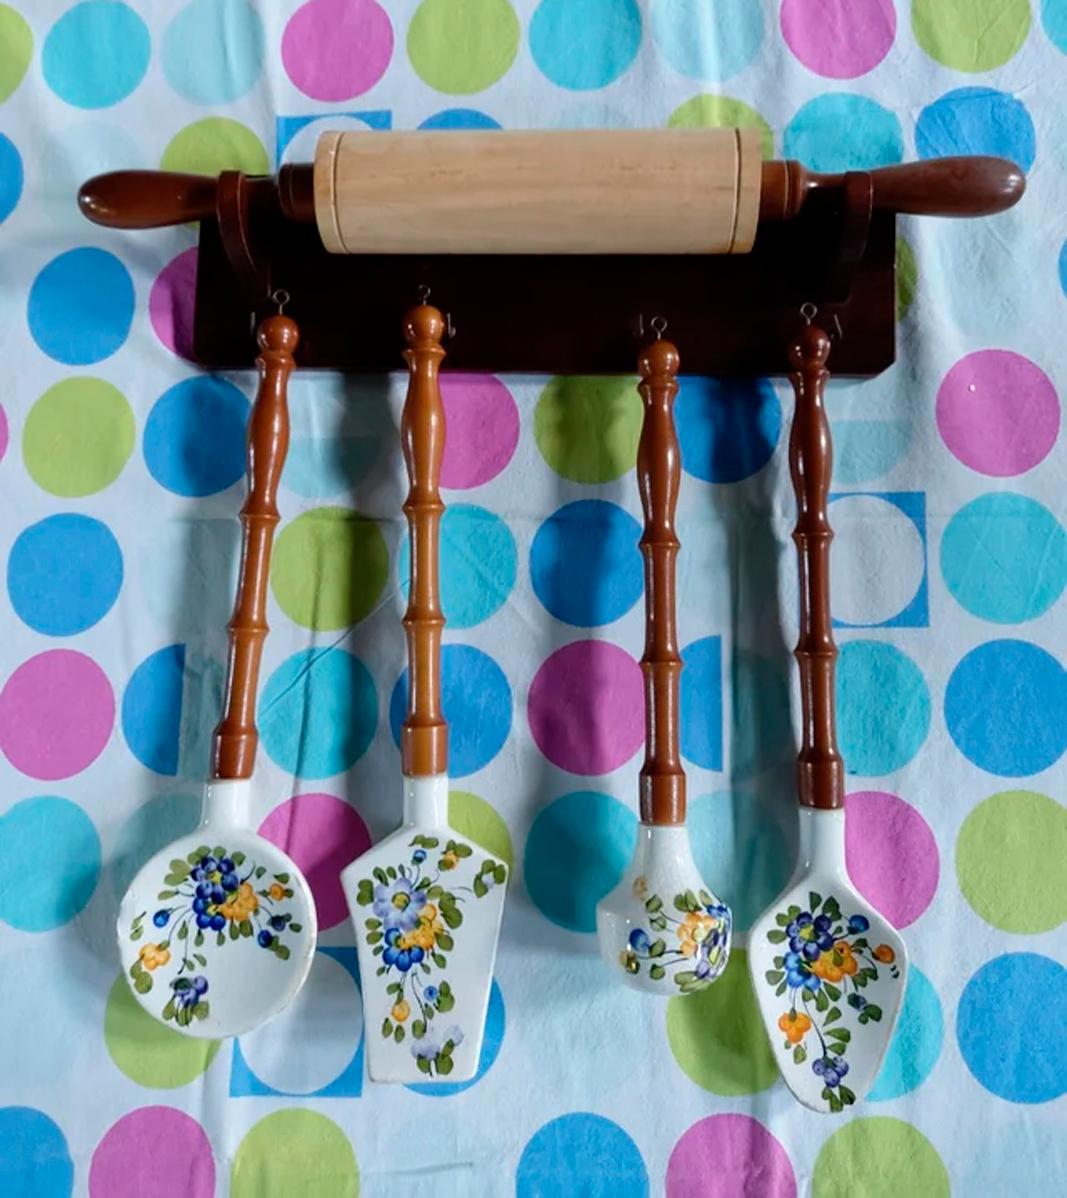 Italian Old kitchen tools or utensils made of wood and ceramin hanging from a hanging bar. Old kitchen appliance  

Saucepan fork palette and serving pot mace and roller hanging on top

This set of wood and ceramin utensils is ideal to decorate a